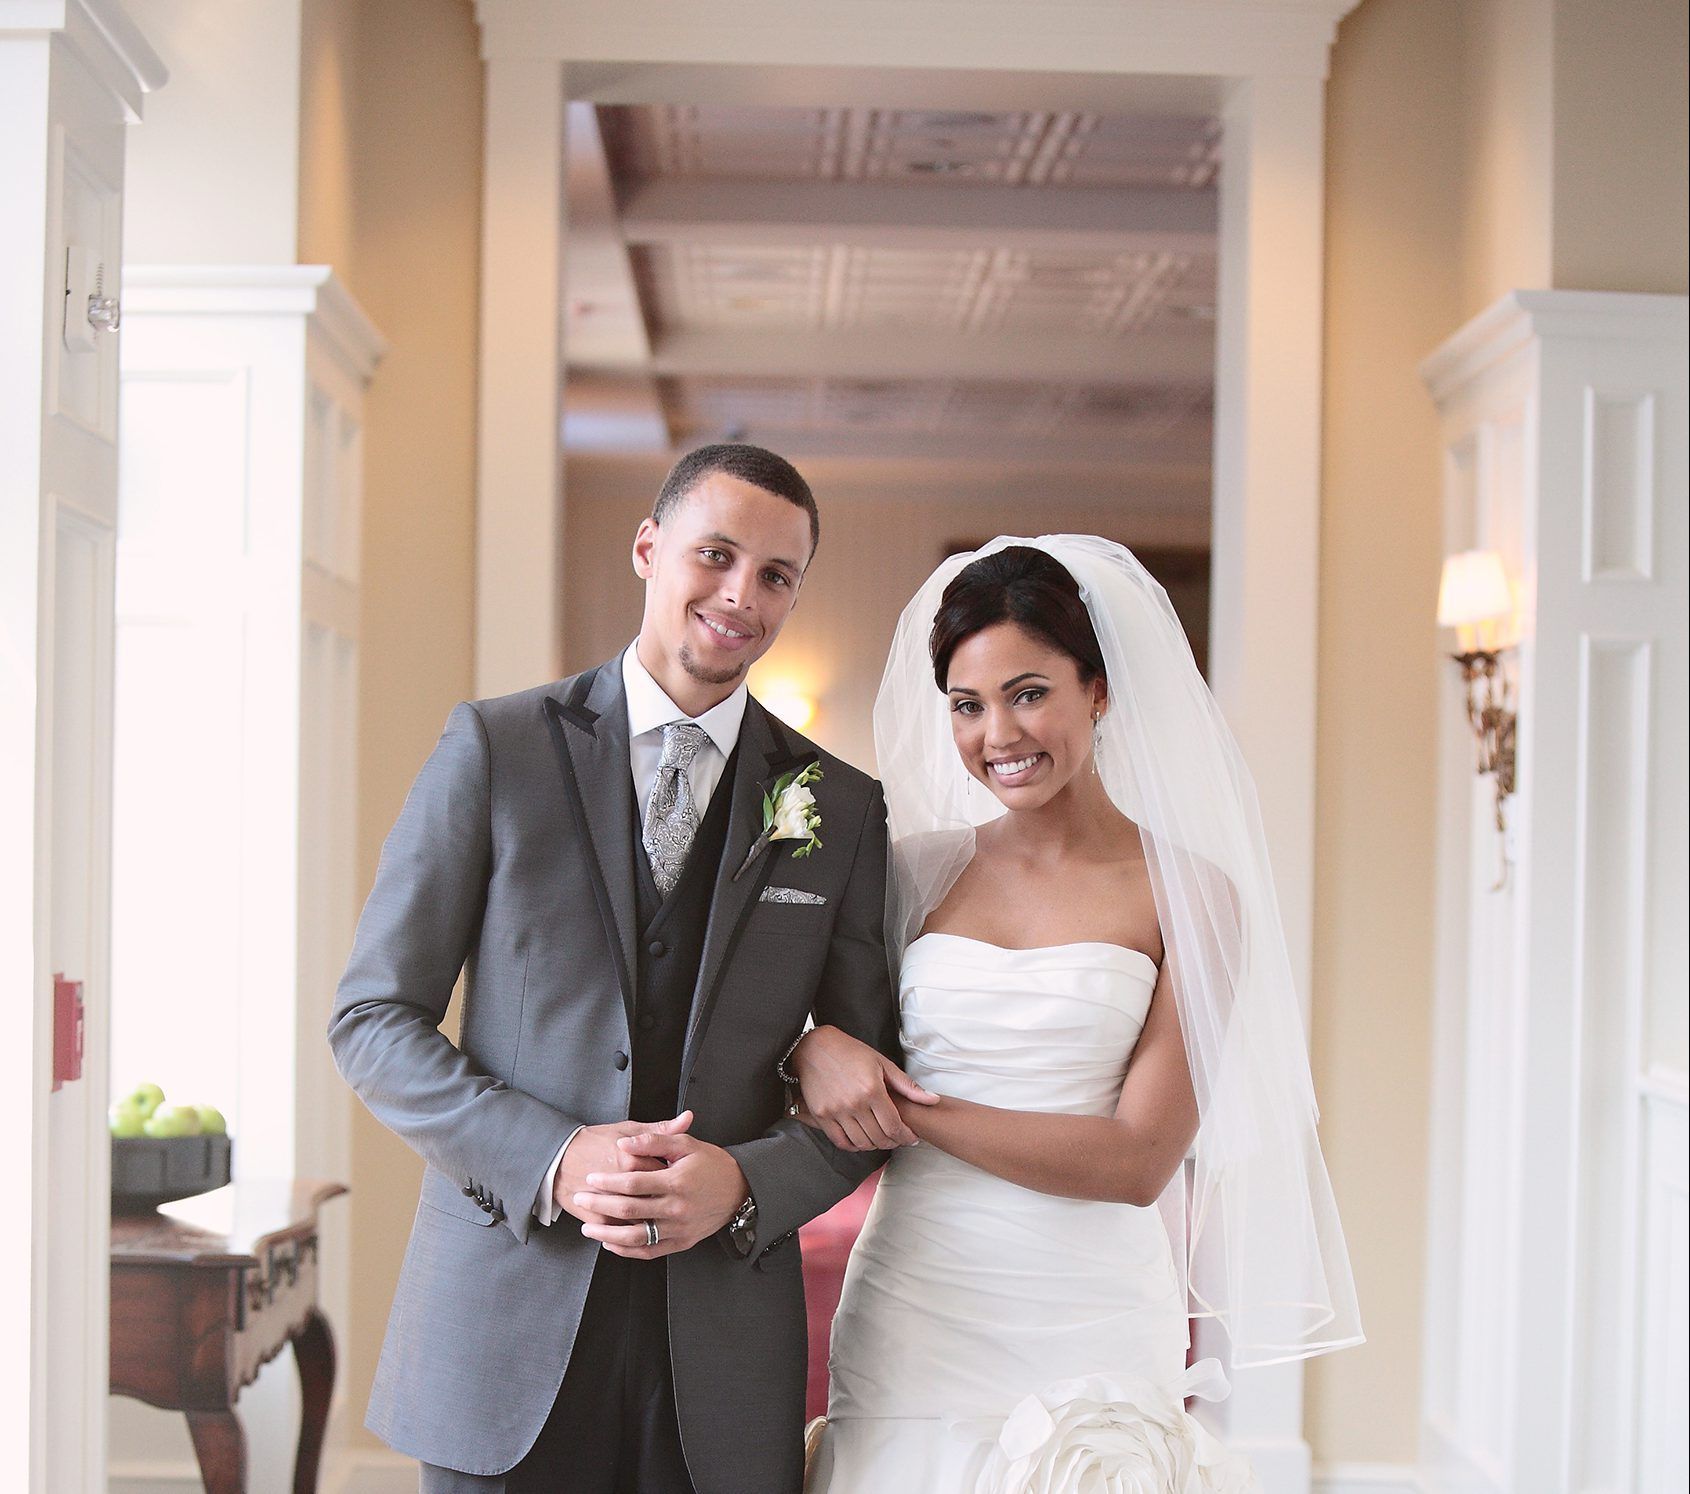 stephen curry and ayesha curry wedding